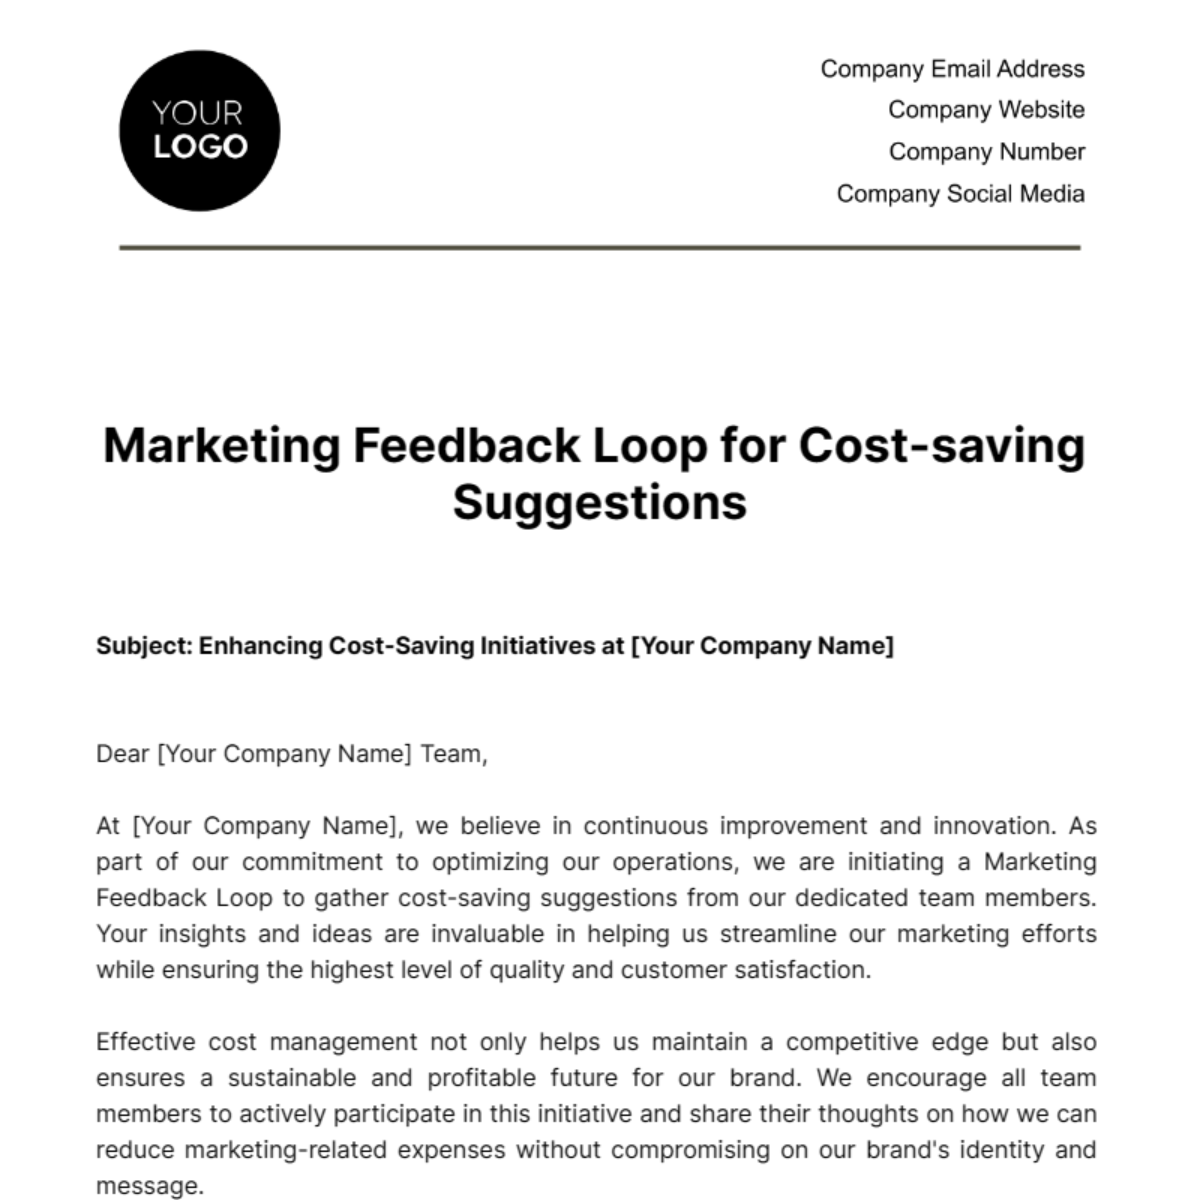 Free Marketing Feedback Loop for Cost-saving Suggestions Template